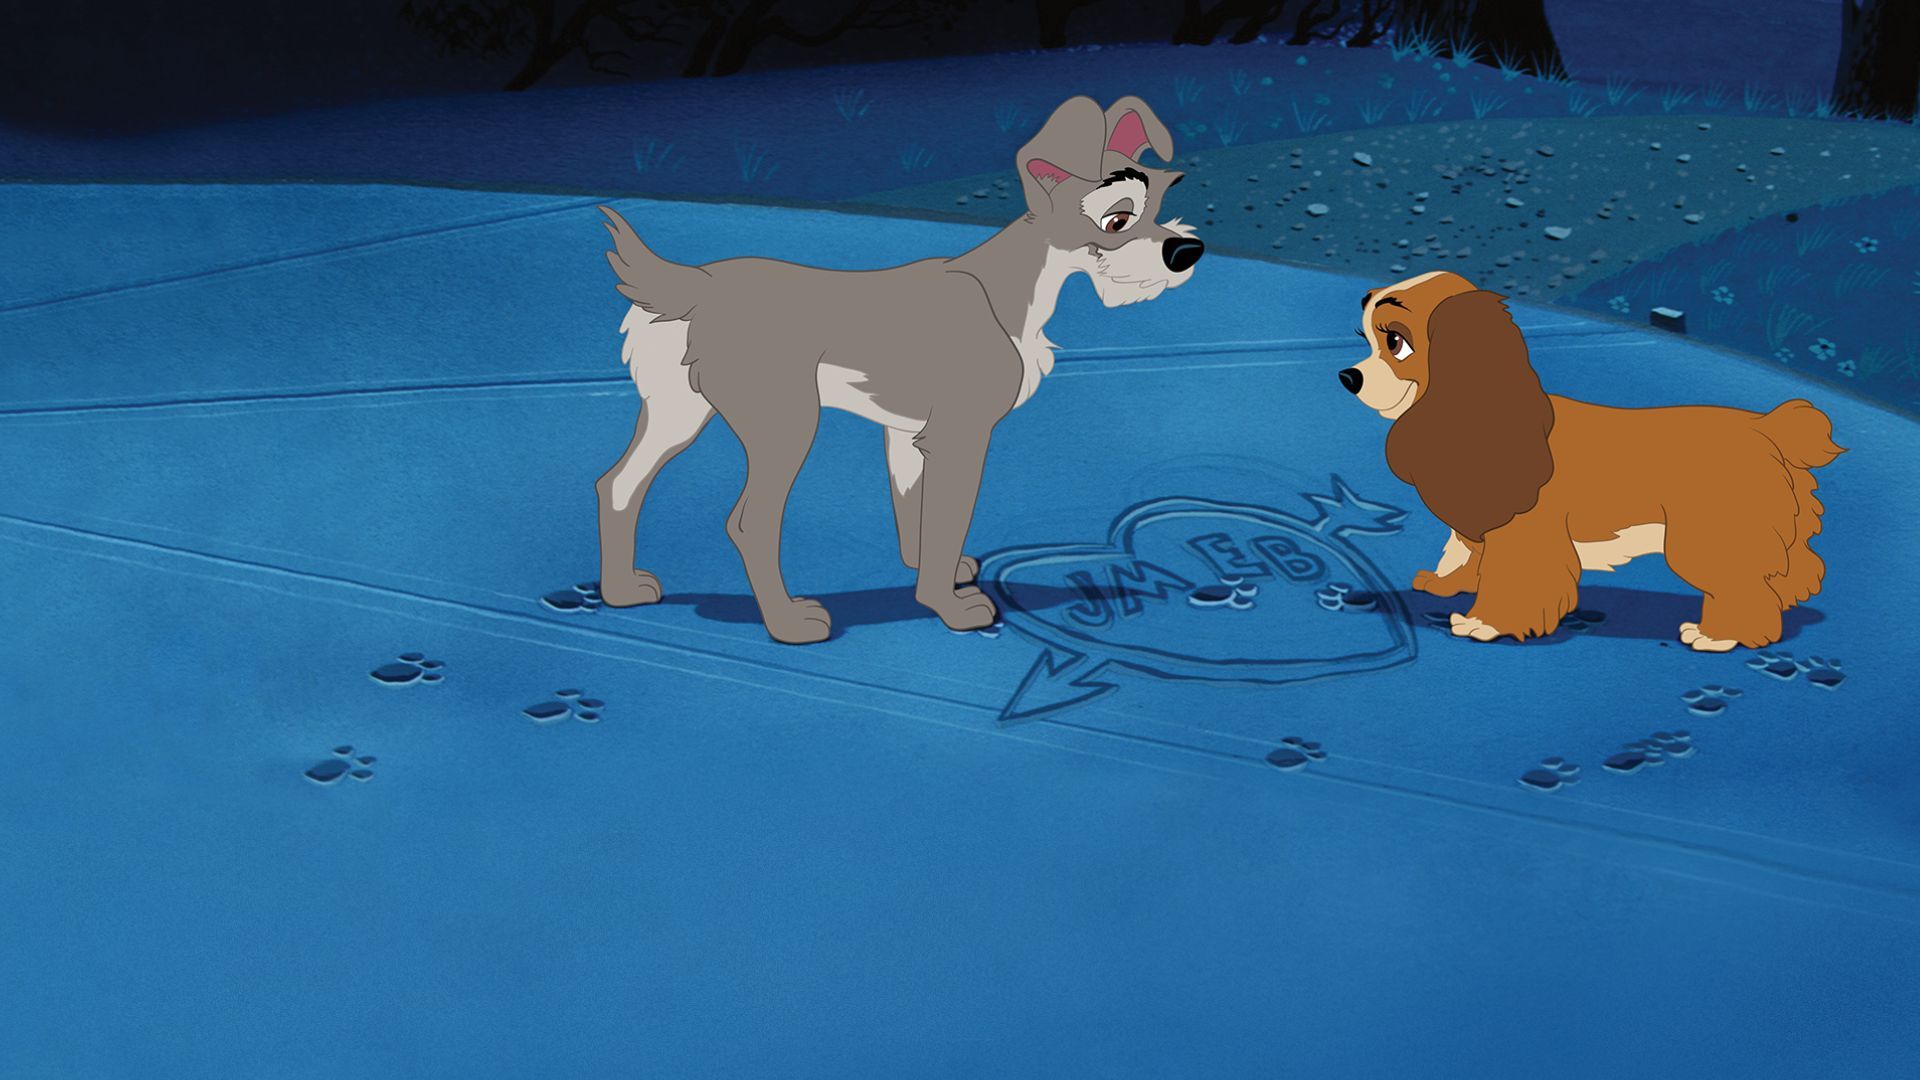 Watch Lady and the Tramp. Full Movie. Disney+